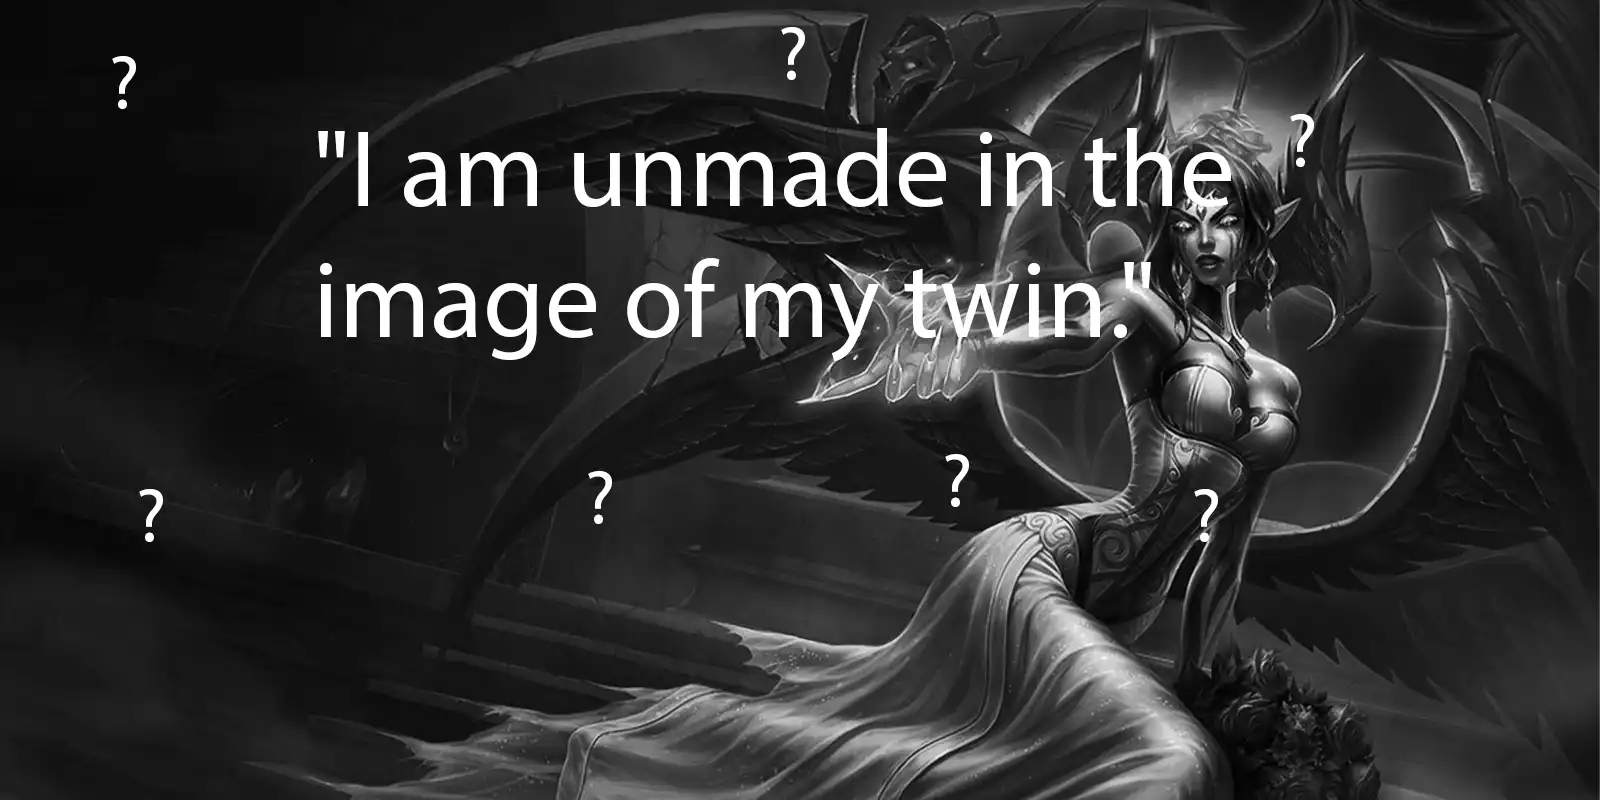 What League champion says "I am unmade in the image of my twin."?